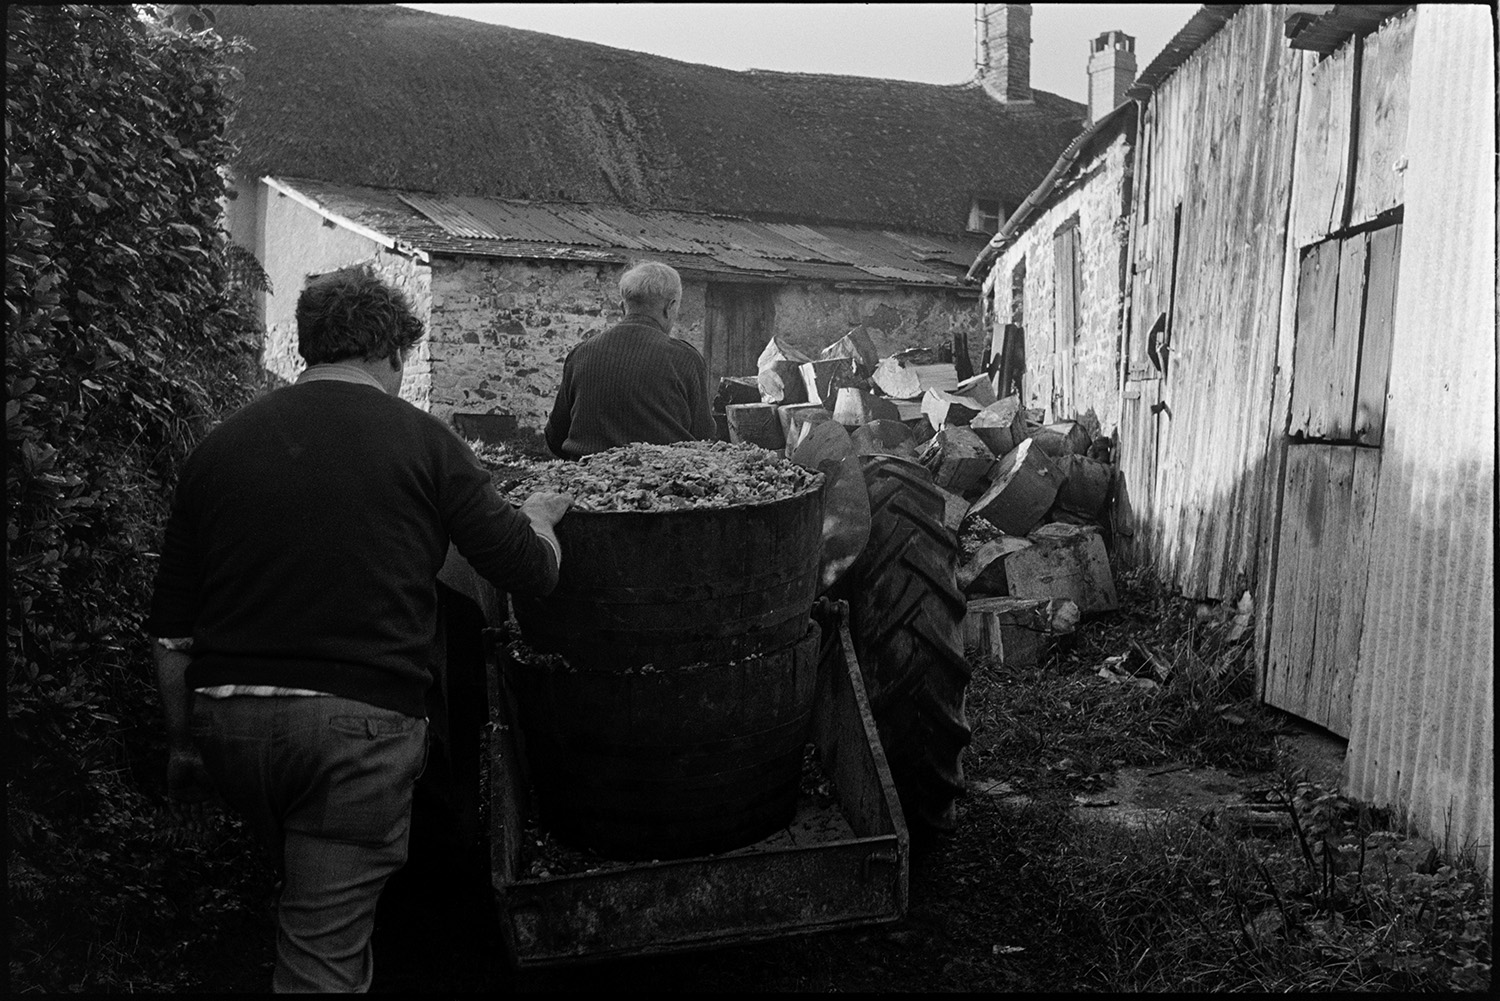 Cider making, apple crusher and cider press. 
[Bill Hammond driving a tractor with barrels of apple pulp past a corrugated iron barn towards a thatched house at Rashleigh Mill, Bridge Reeve. Another man is walking behind the tractor.]